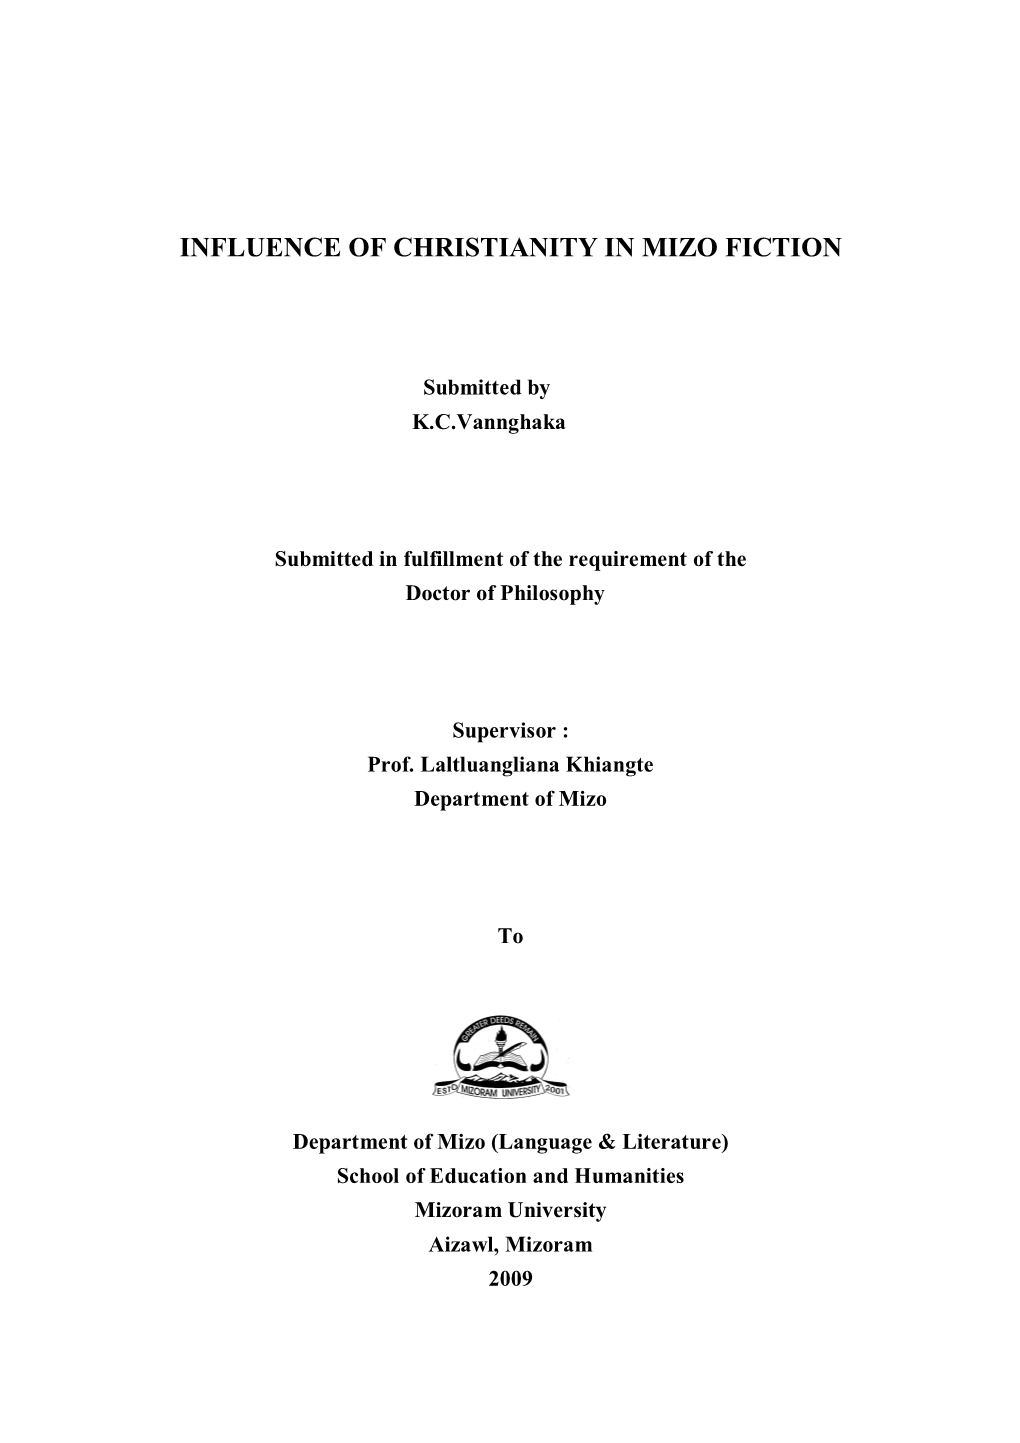 Influence of Christianity in Mizo Fiction